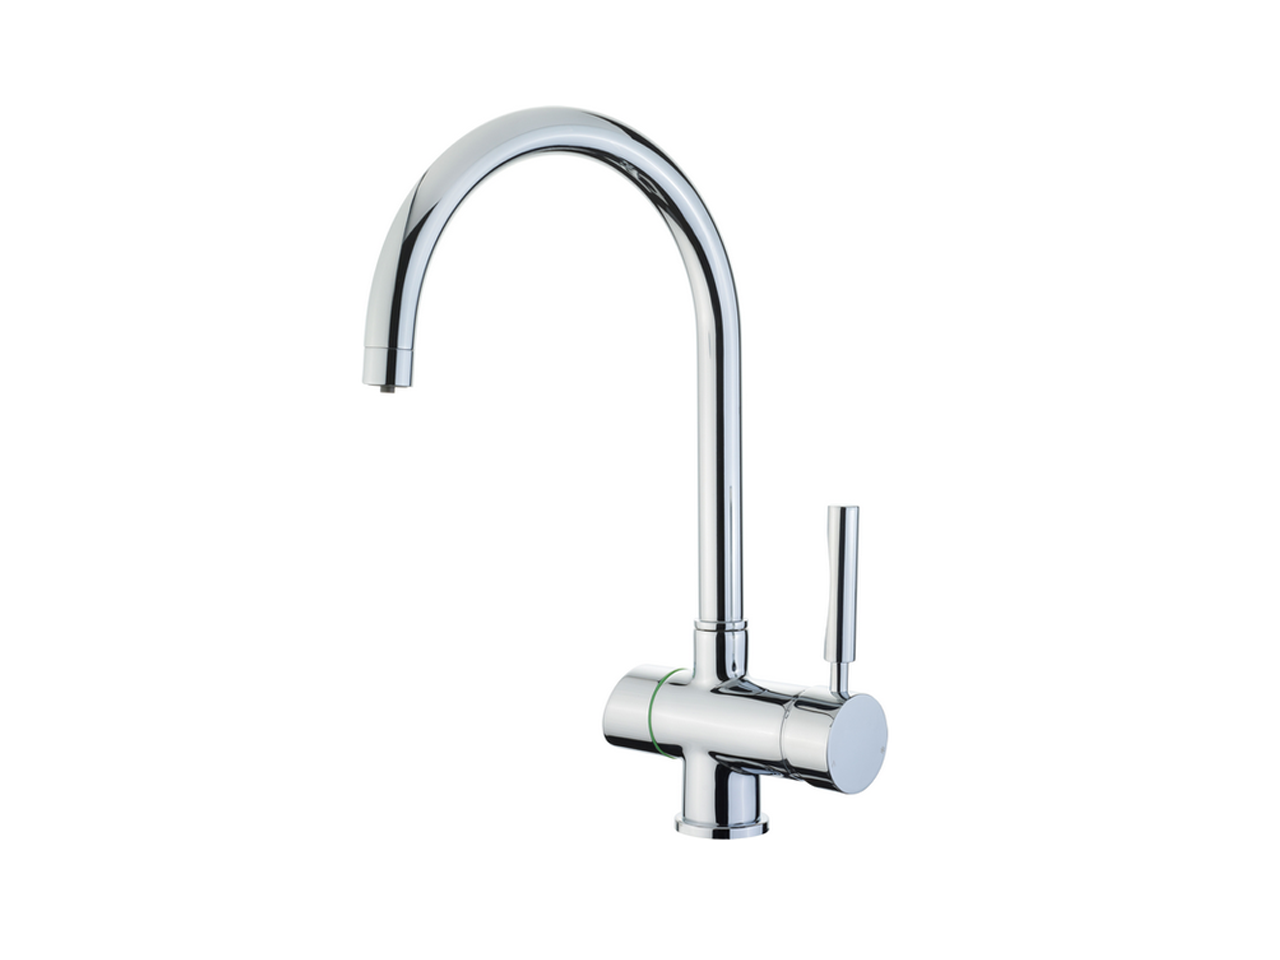 CisalSingle lever sink mixer for OSMOSIS KITCHEN_LC000011